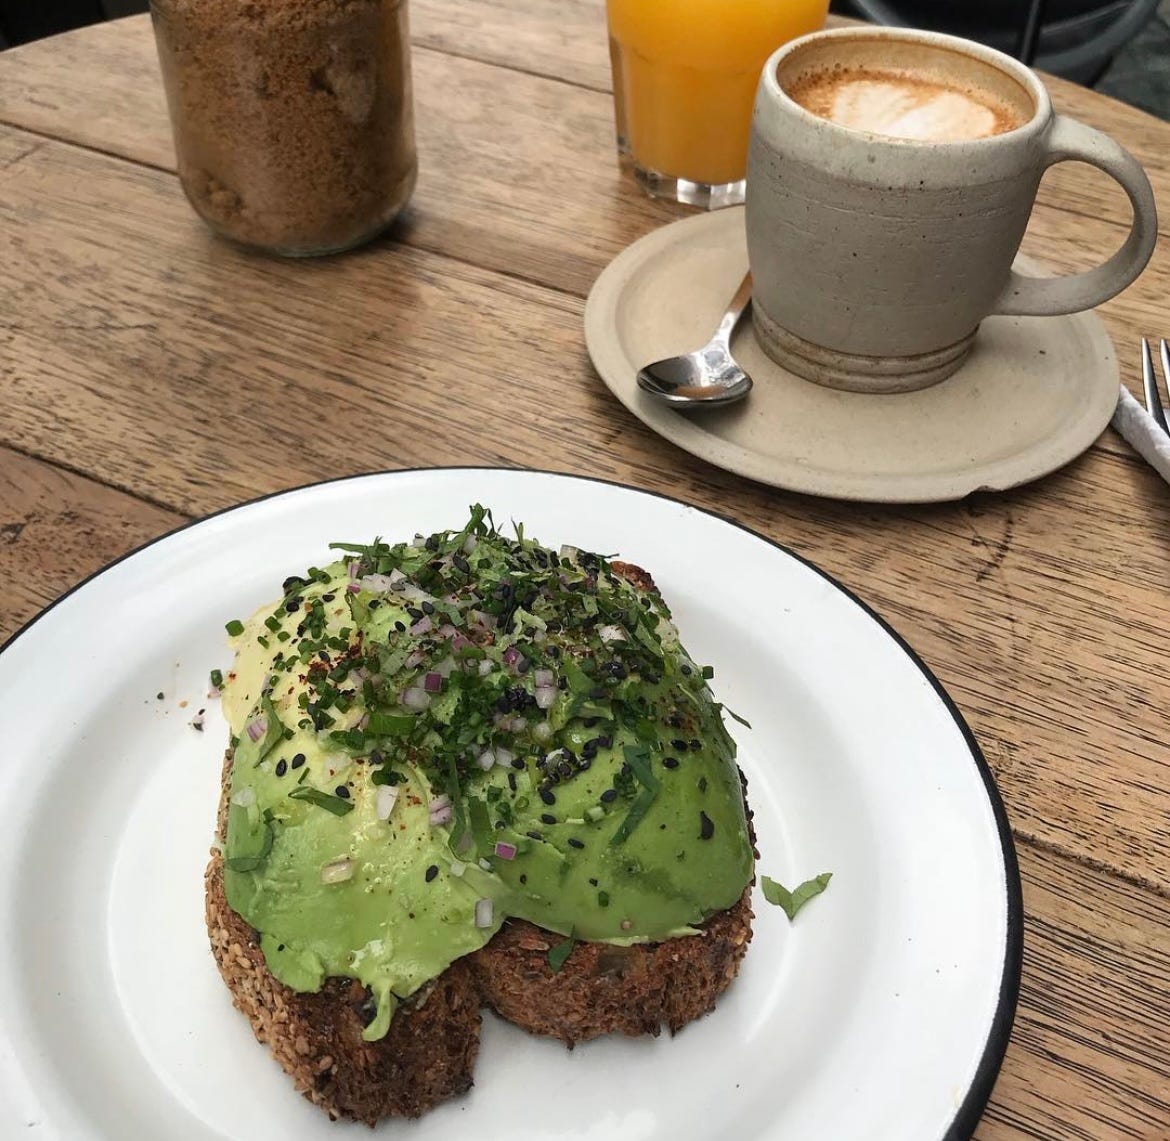 A beautiful avocado toast on a wooden table with a cappuccino by its side